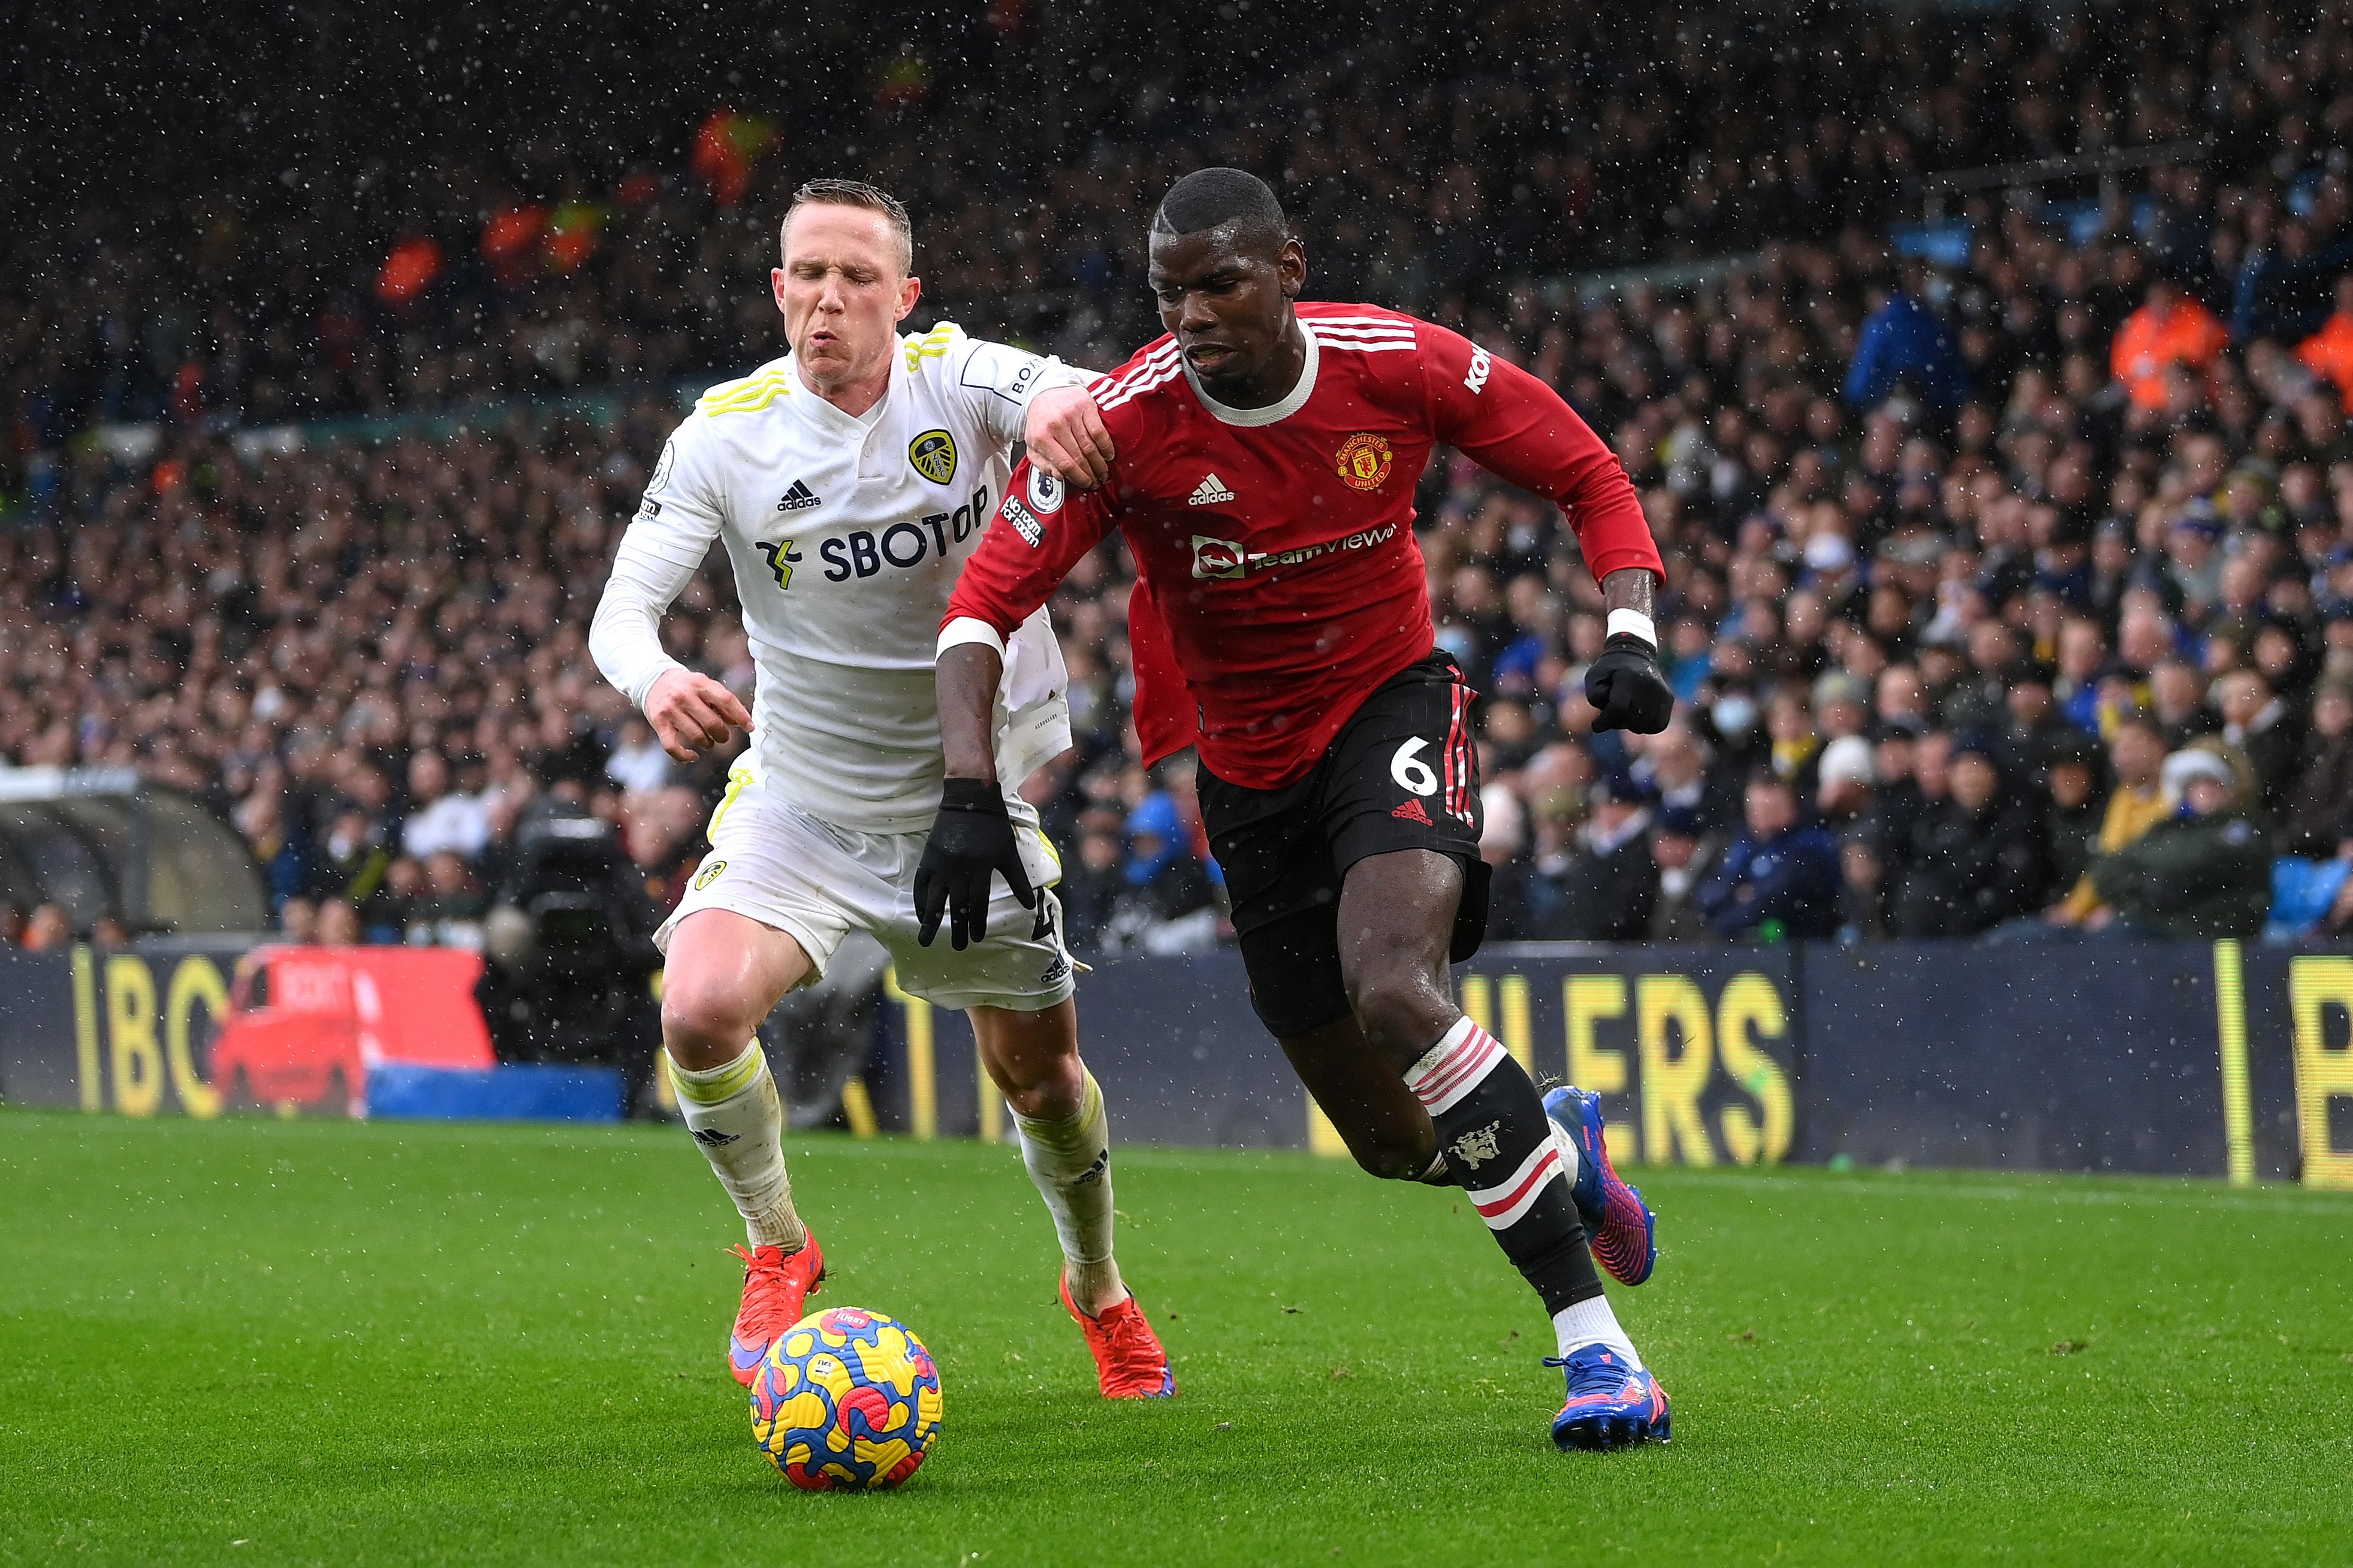 Paul Pogba had the beating of Adam Forshaw throughout the first half